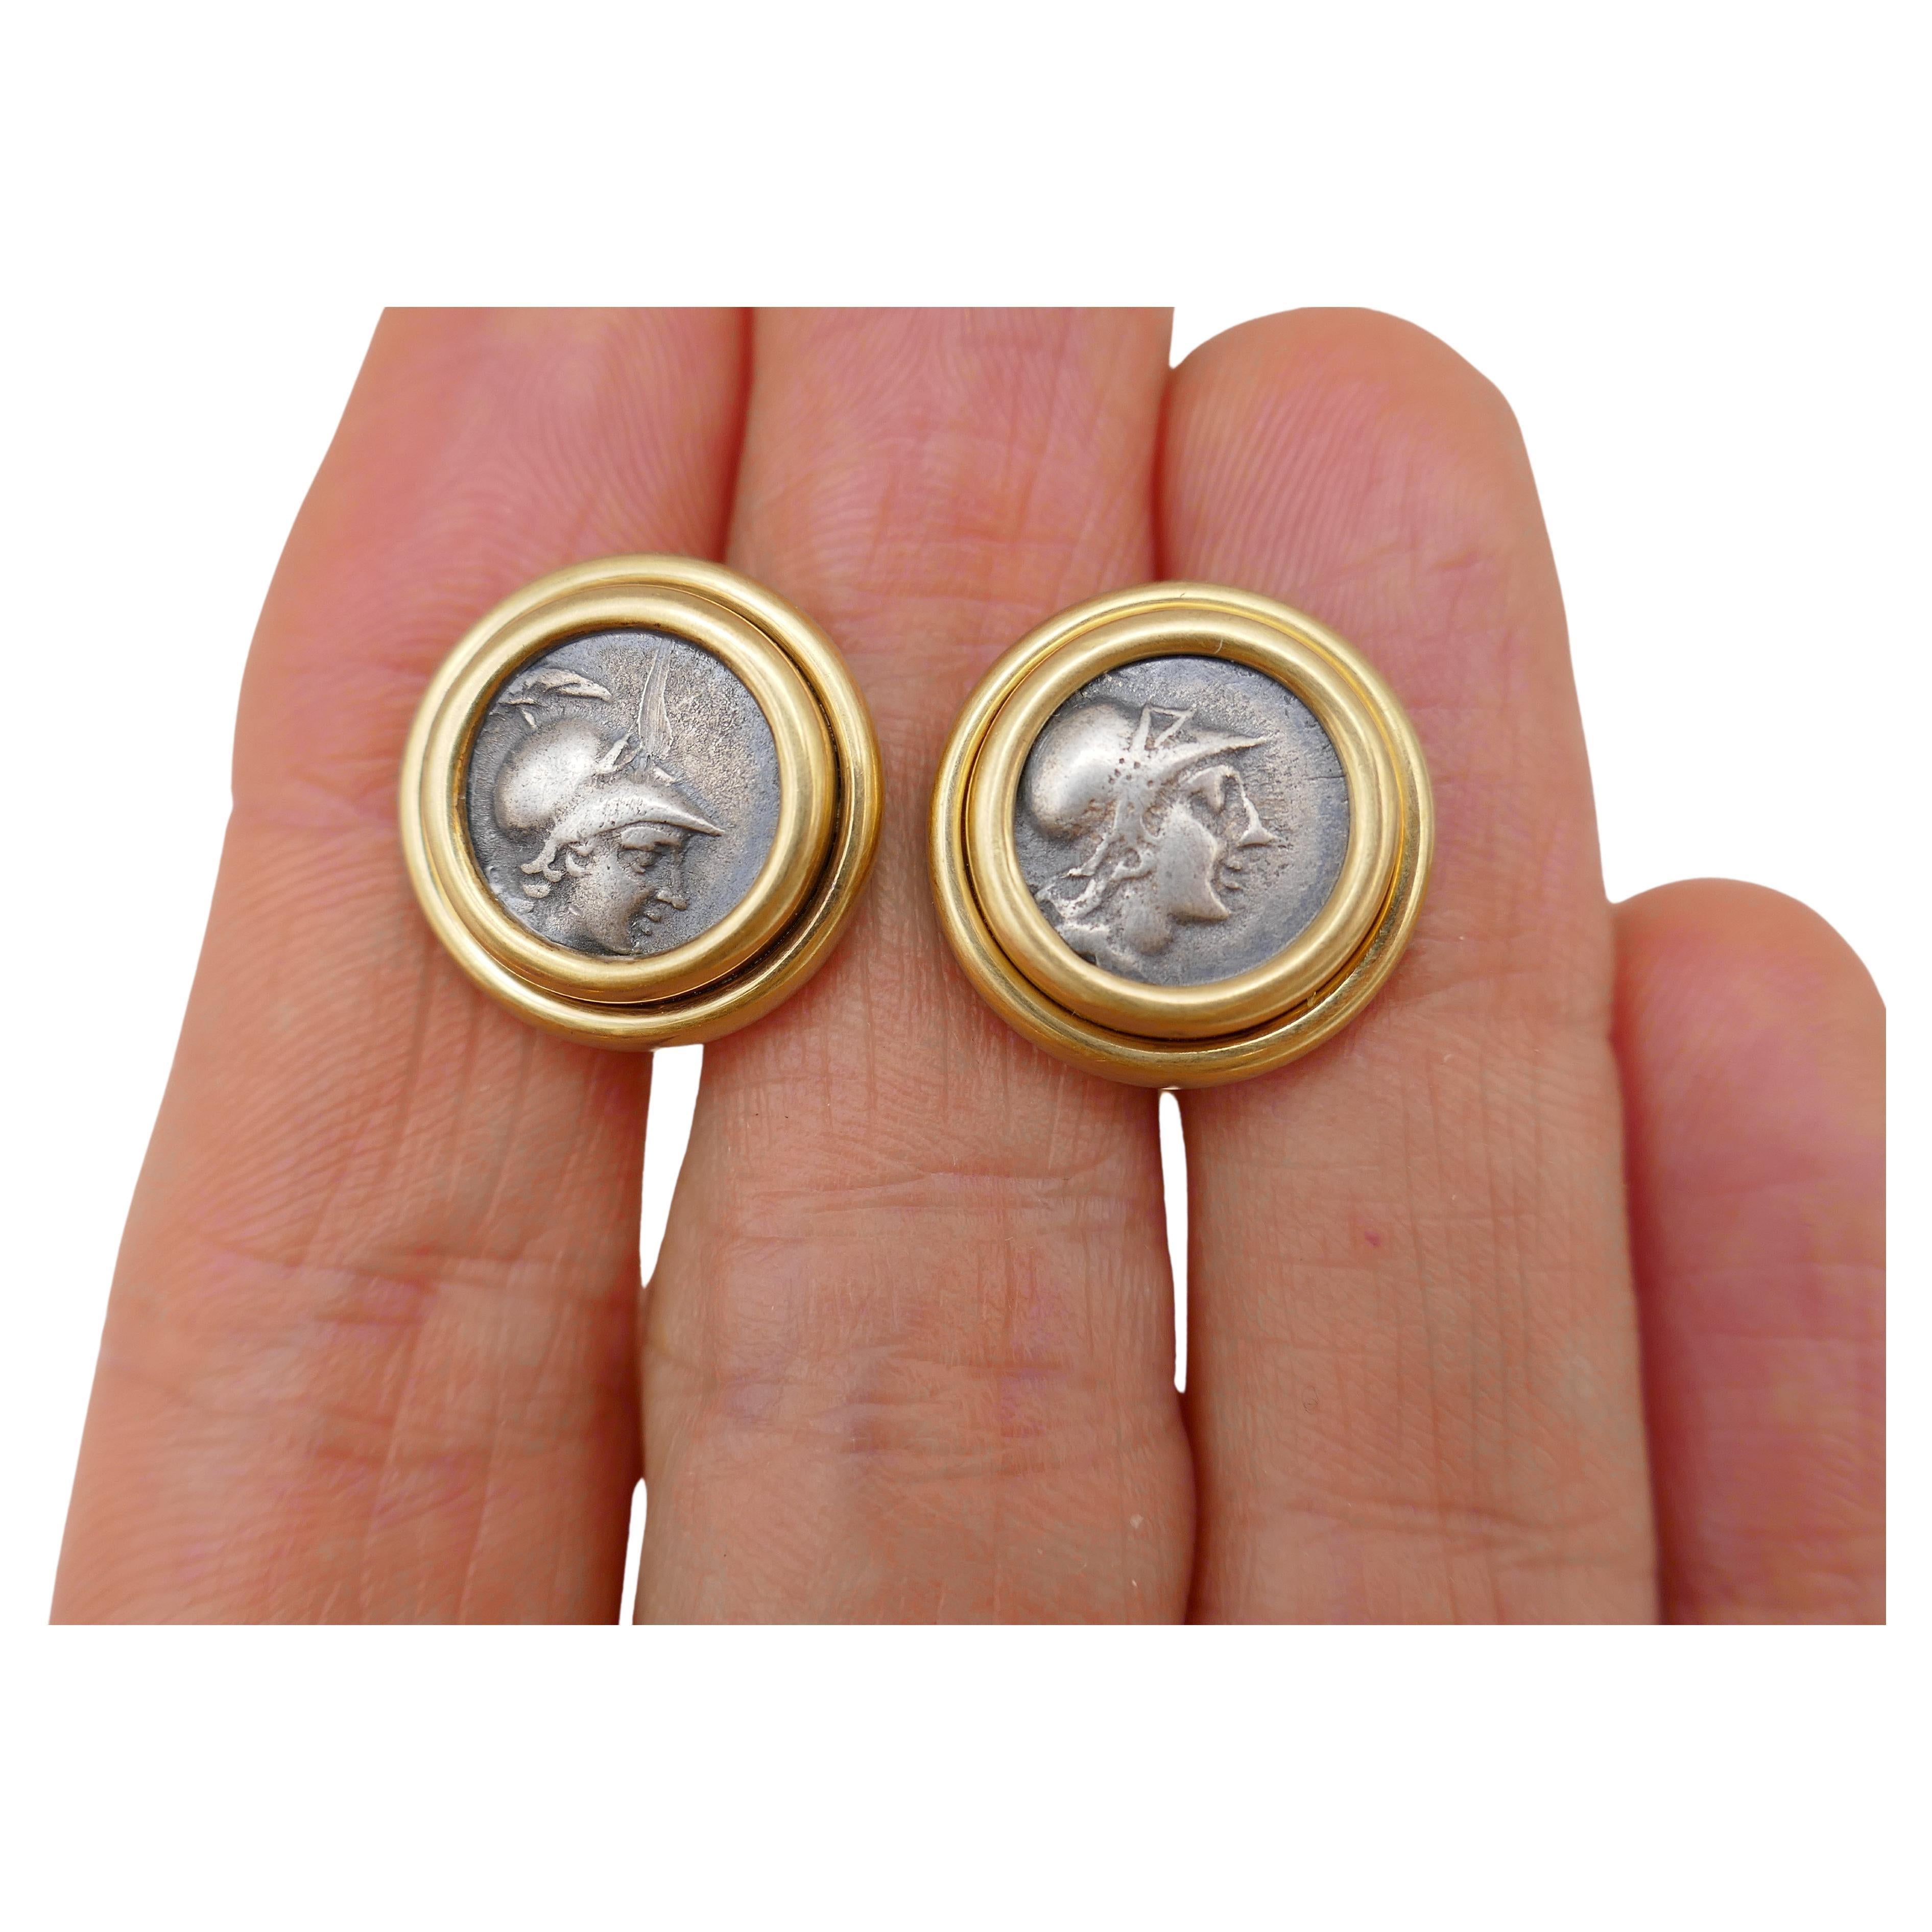 A pair of vintage cufflinks by Bulgari, made of 18k yellow gold featuring ancient Roman coin. 
The coins are silver, double bezel set. They are from 2nd century B.C., which make them 2,300 year old.
The cufflinks stamped with 